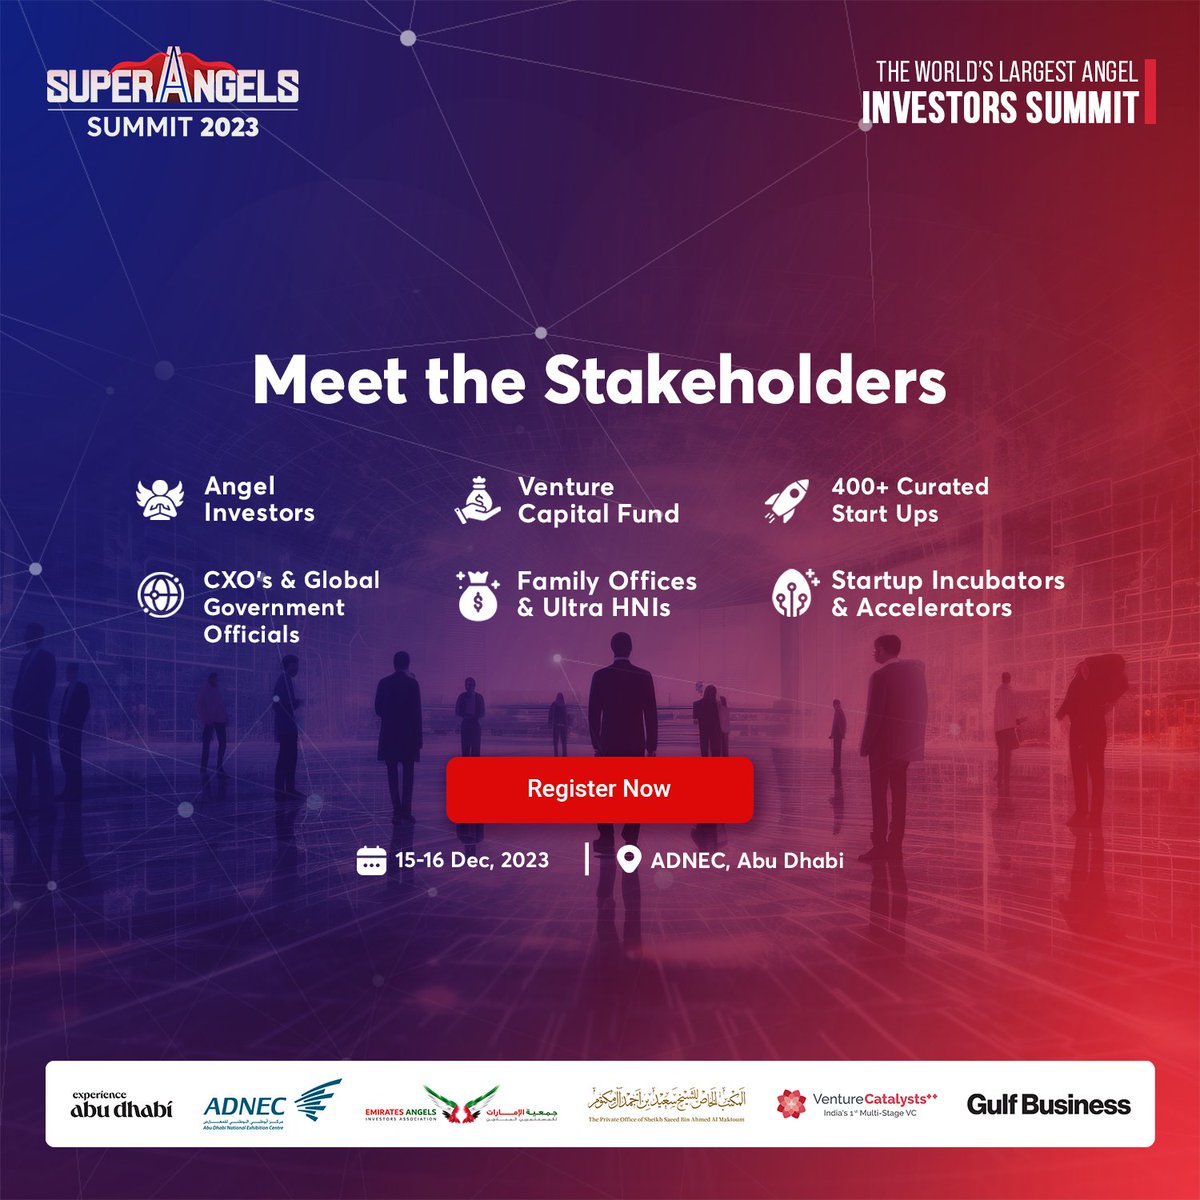 Meet with top-tier global investors and carefully vetted attendees for in-depth discussions leading to meaningful connections.

#Sponsorship #speaker #opprtunities #SuperAngelsSummit #SuperAngelsSummit2023  
#angelinvestors #AngelInvestors #event